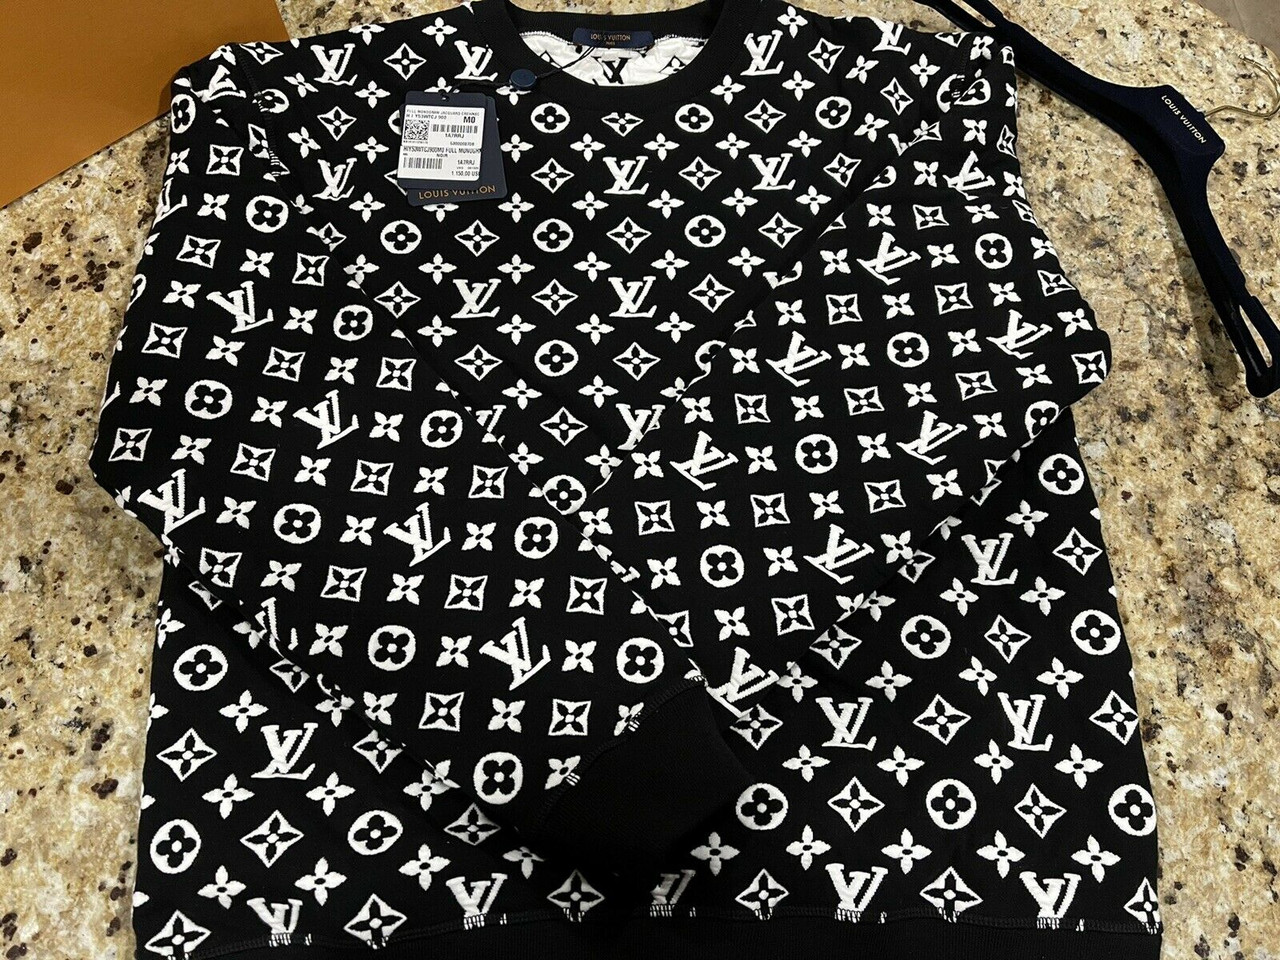 SOLD) LOUIS VUITTON FULL MONOGRAM JACQUARD CREWNECK Size XL Beautiful  sweater by LV, quickly sold out online and in store especially in…